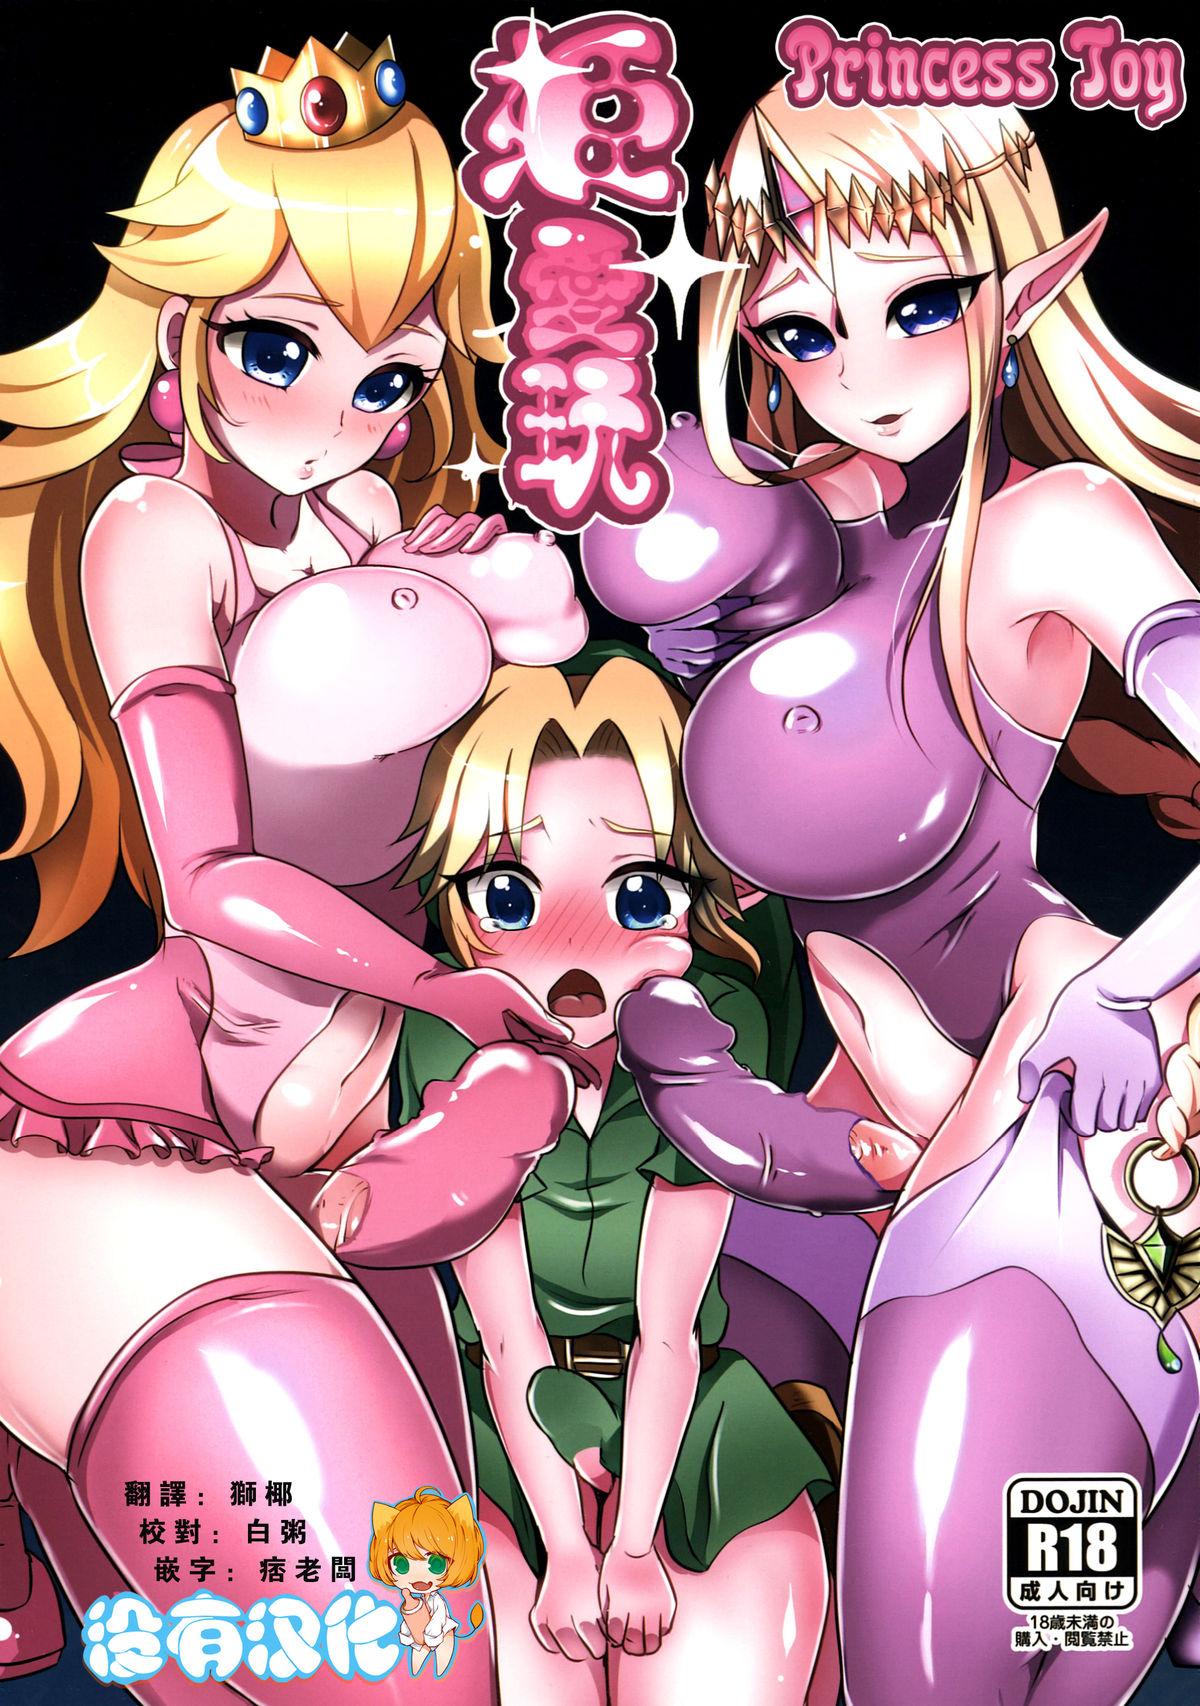 Chat Hime Aigan - The legend of zelda Super mario brothers Hardcoresex - Picture 1